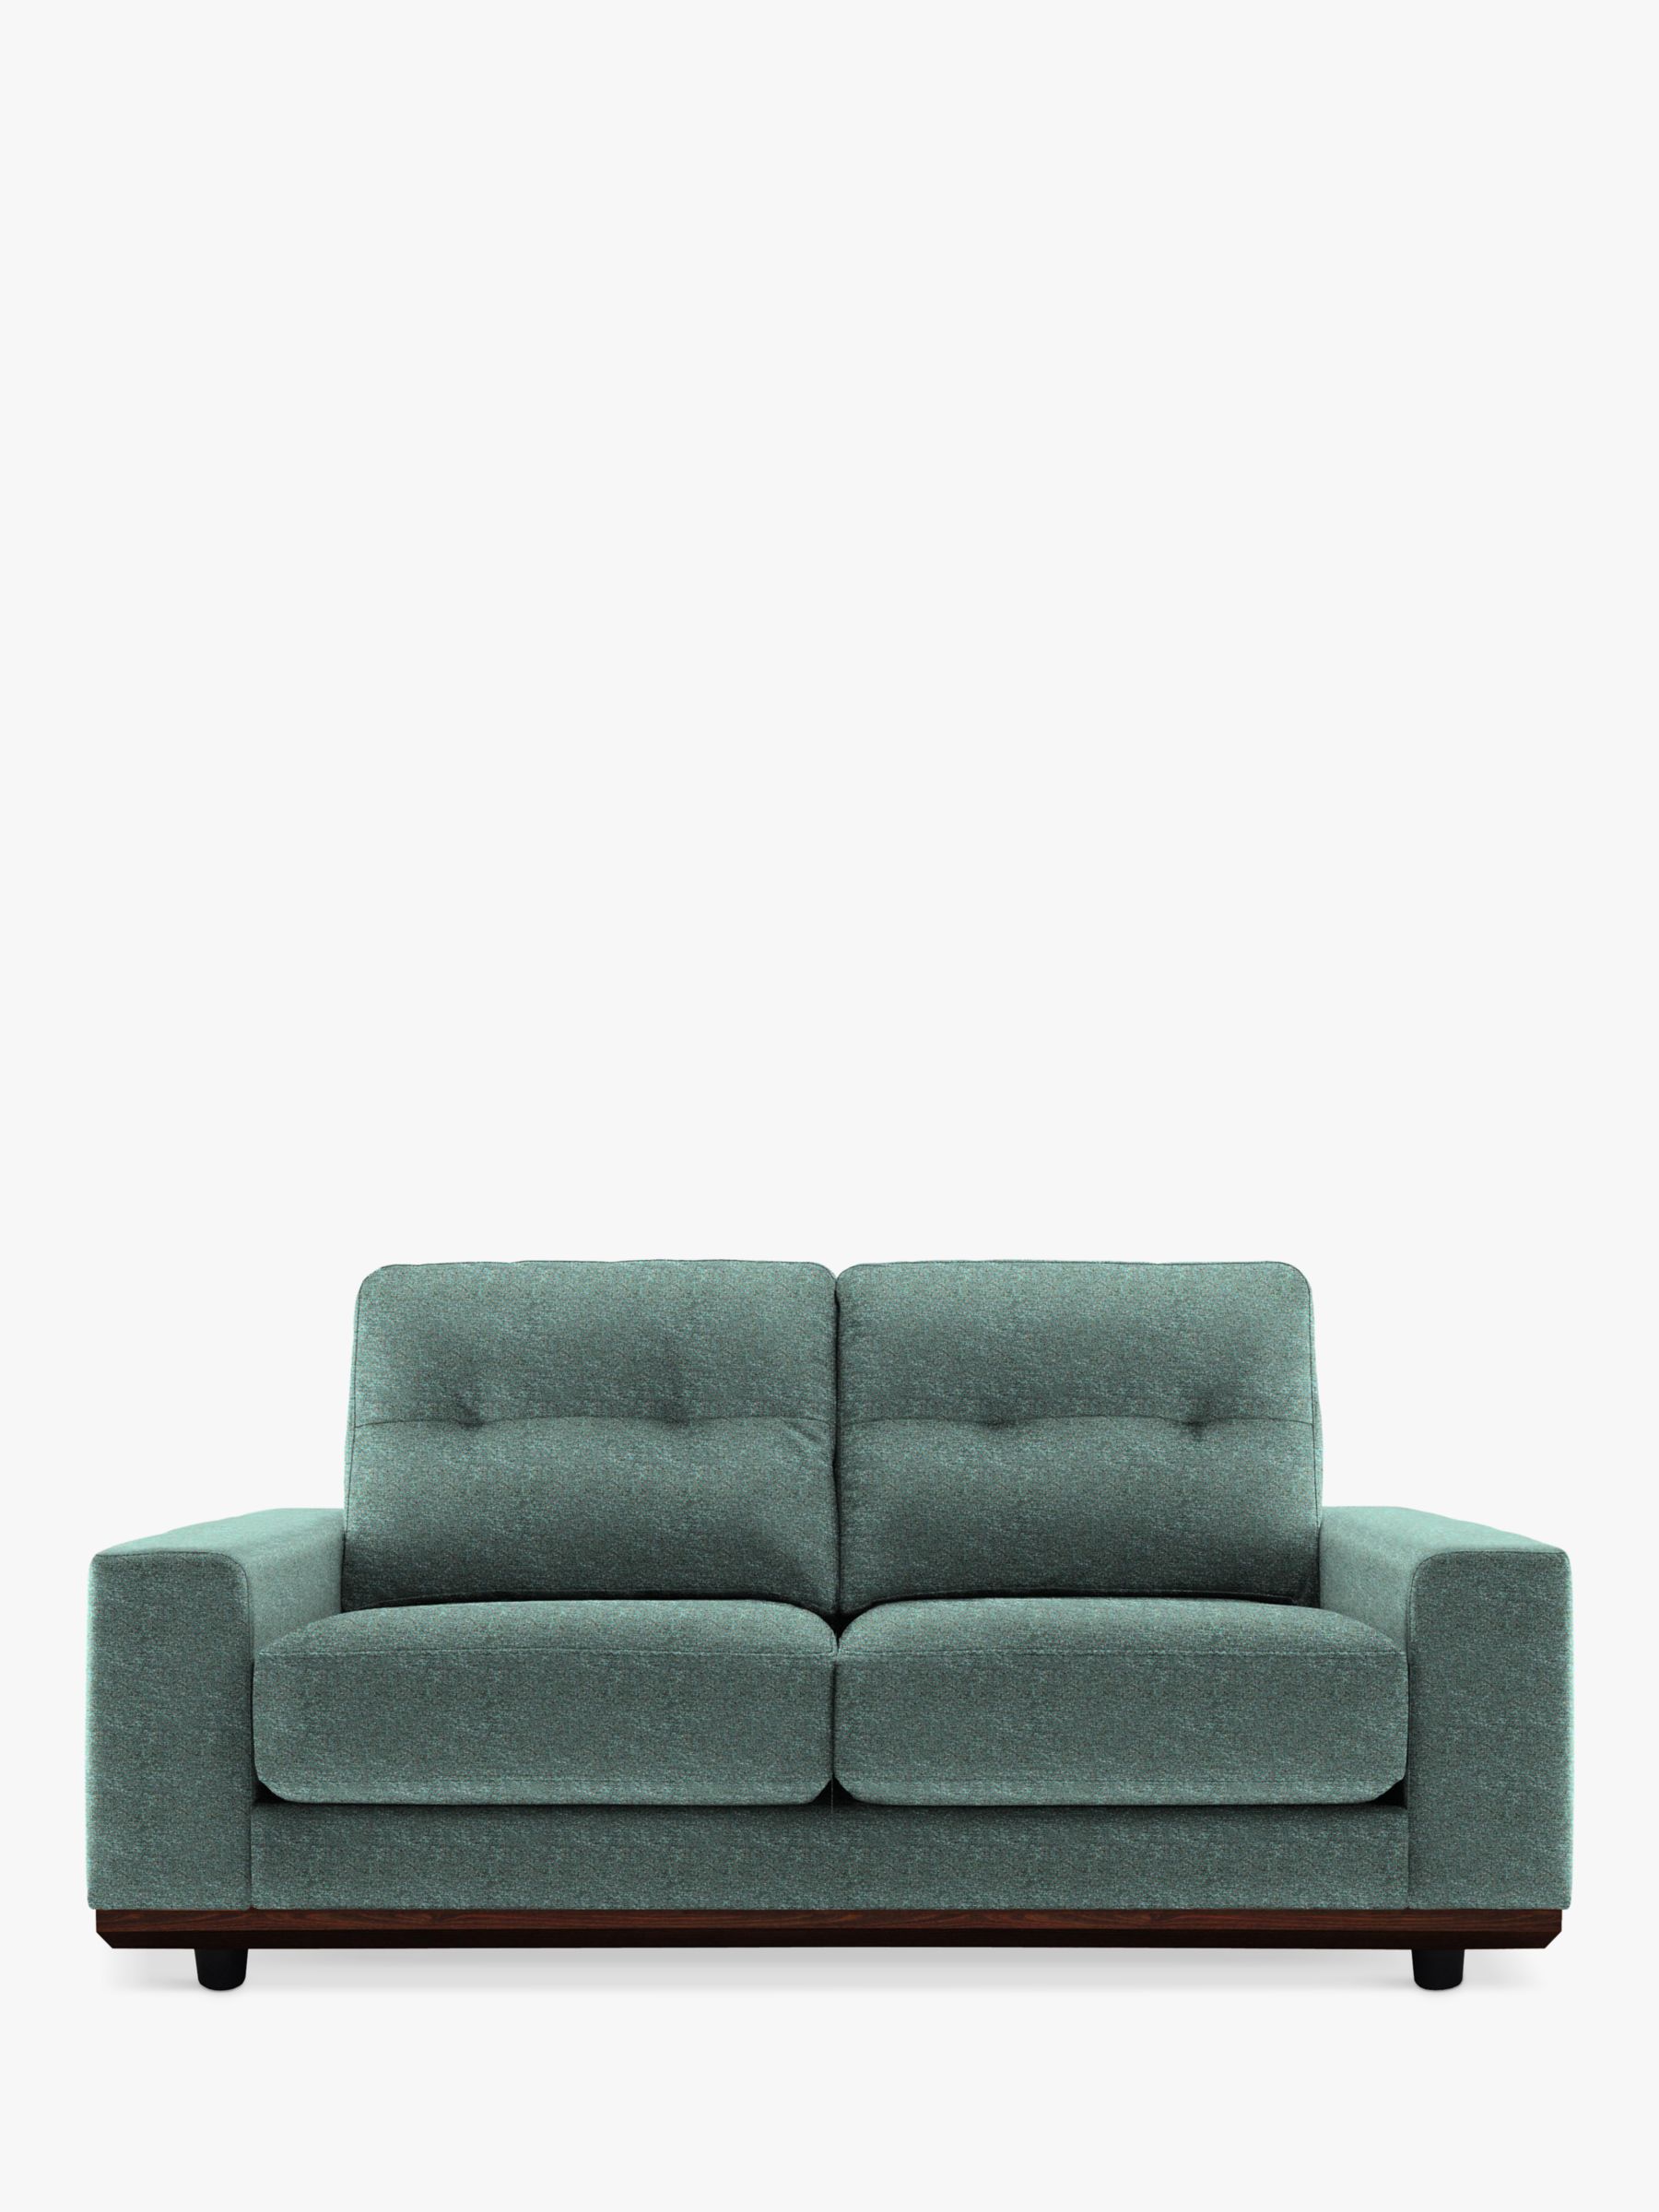 Photo of G plan vintage the seventy one small 2 seater sofa